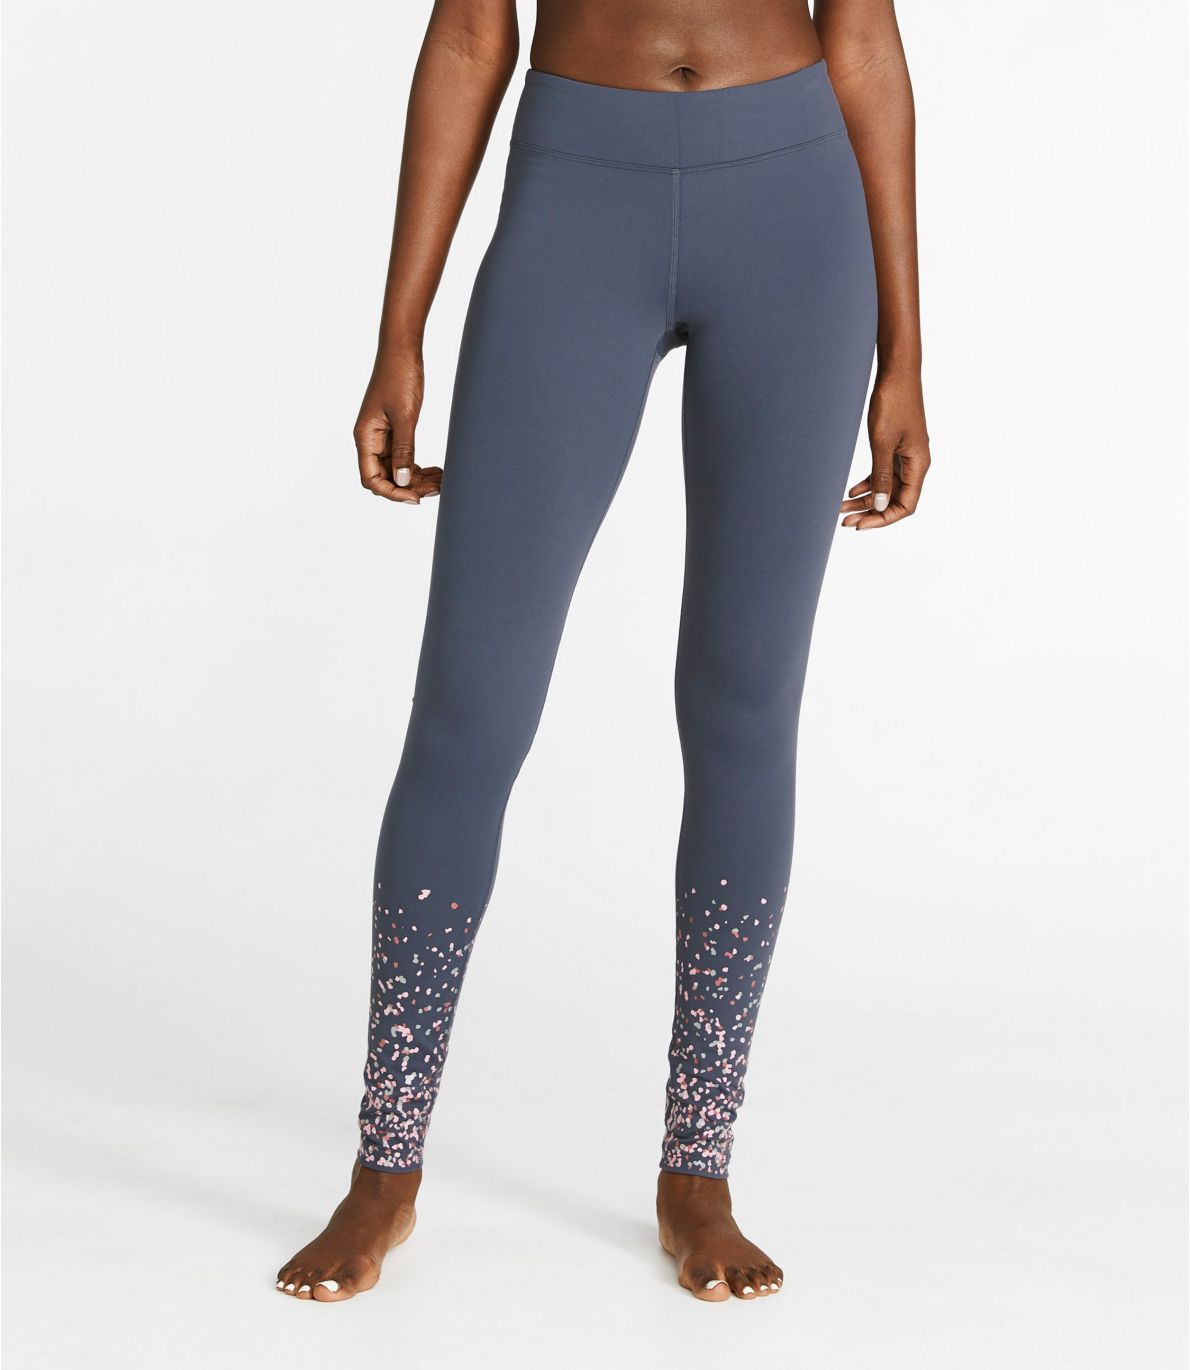 Women's Boundless Performance Tights, Low-Rise Graphic